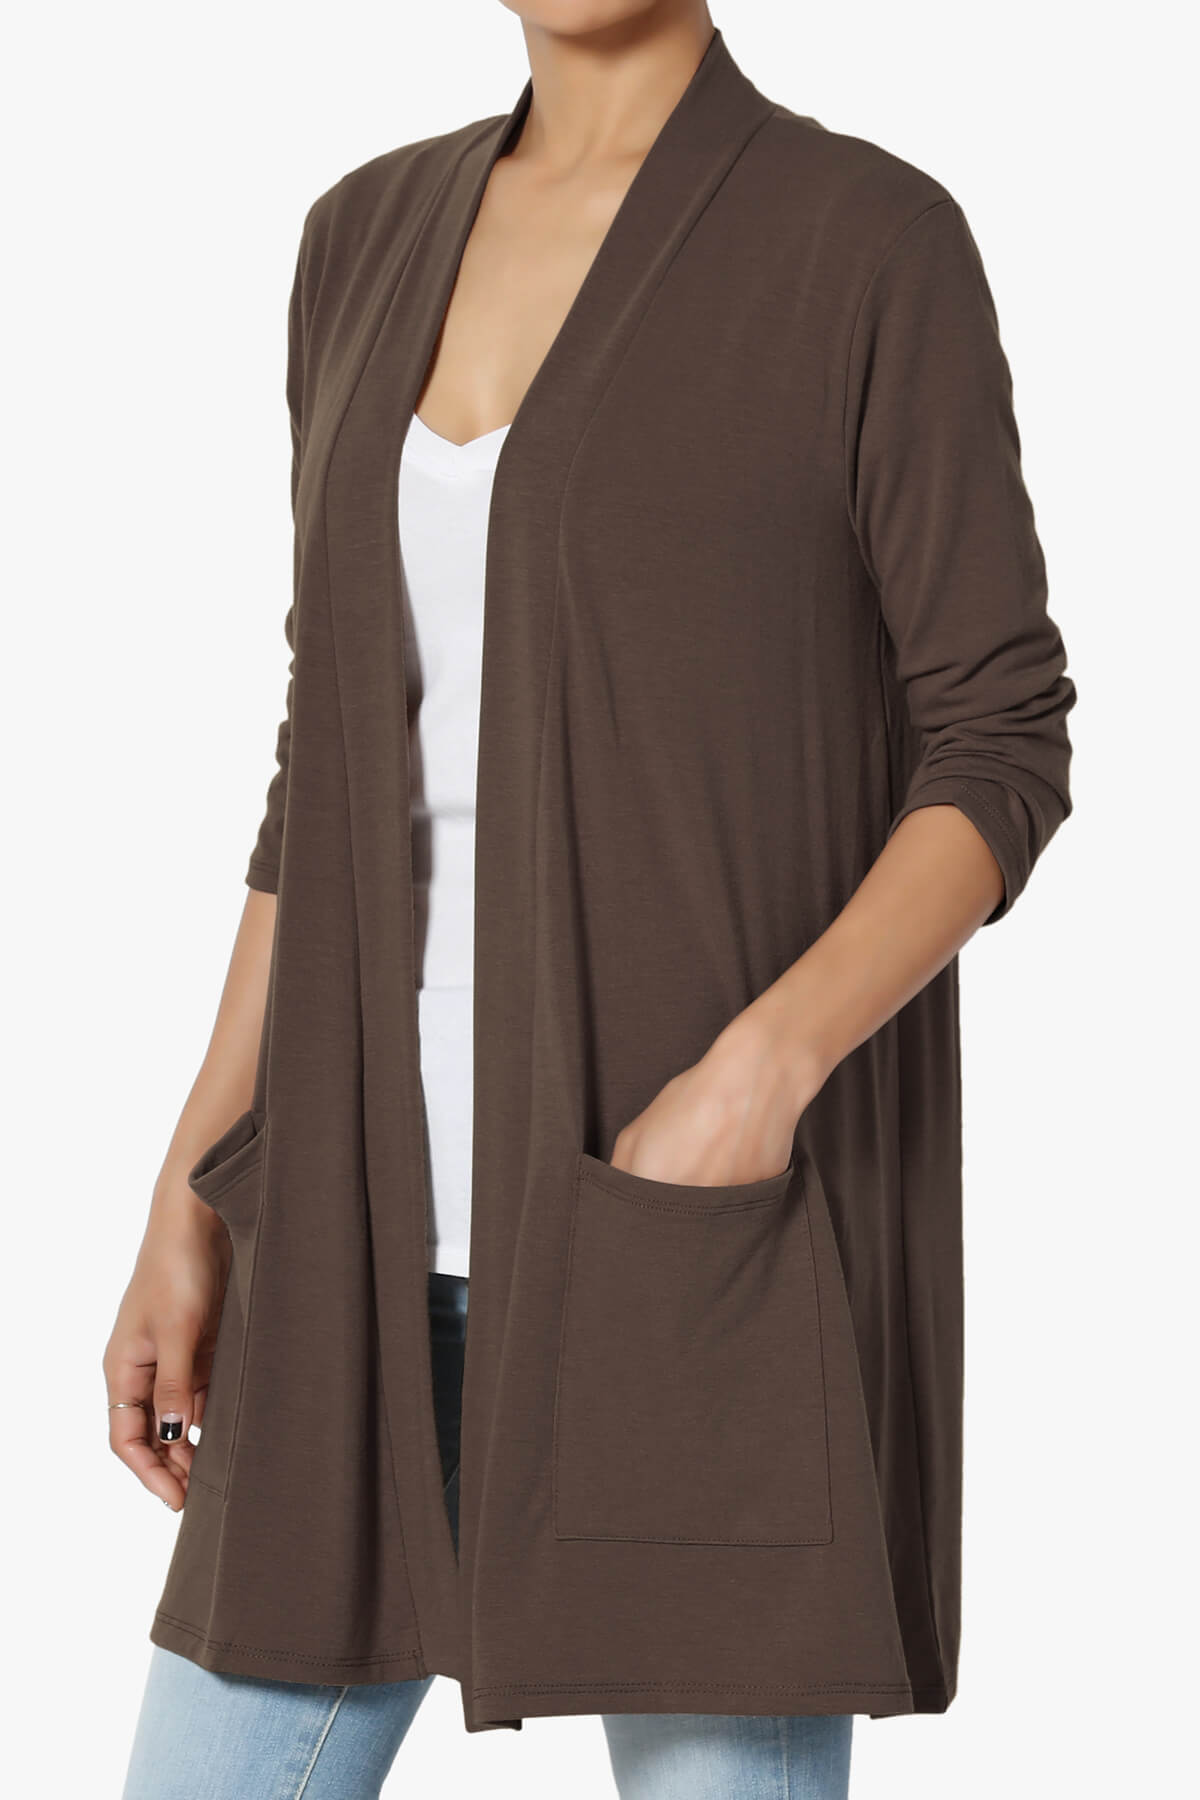 Load image into Gallery viewer, Daday Slouchy Pocket 3/4 Sleeve Cardigan BROWN_3
